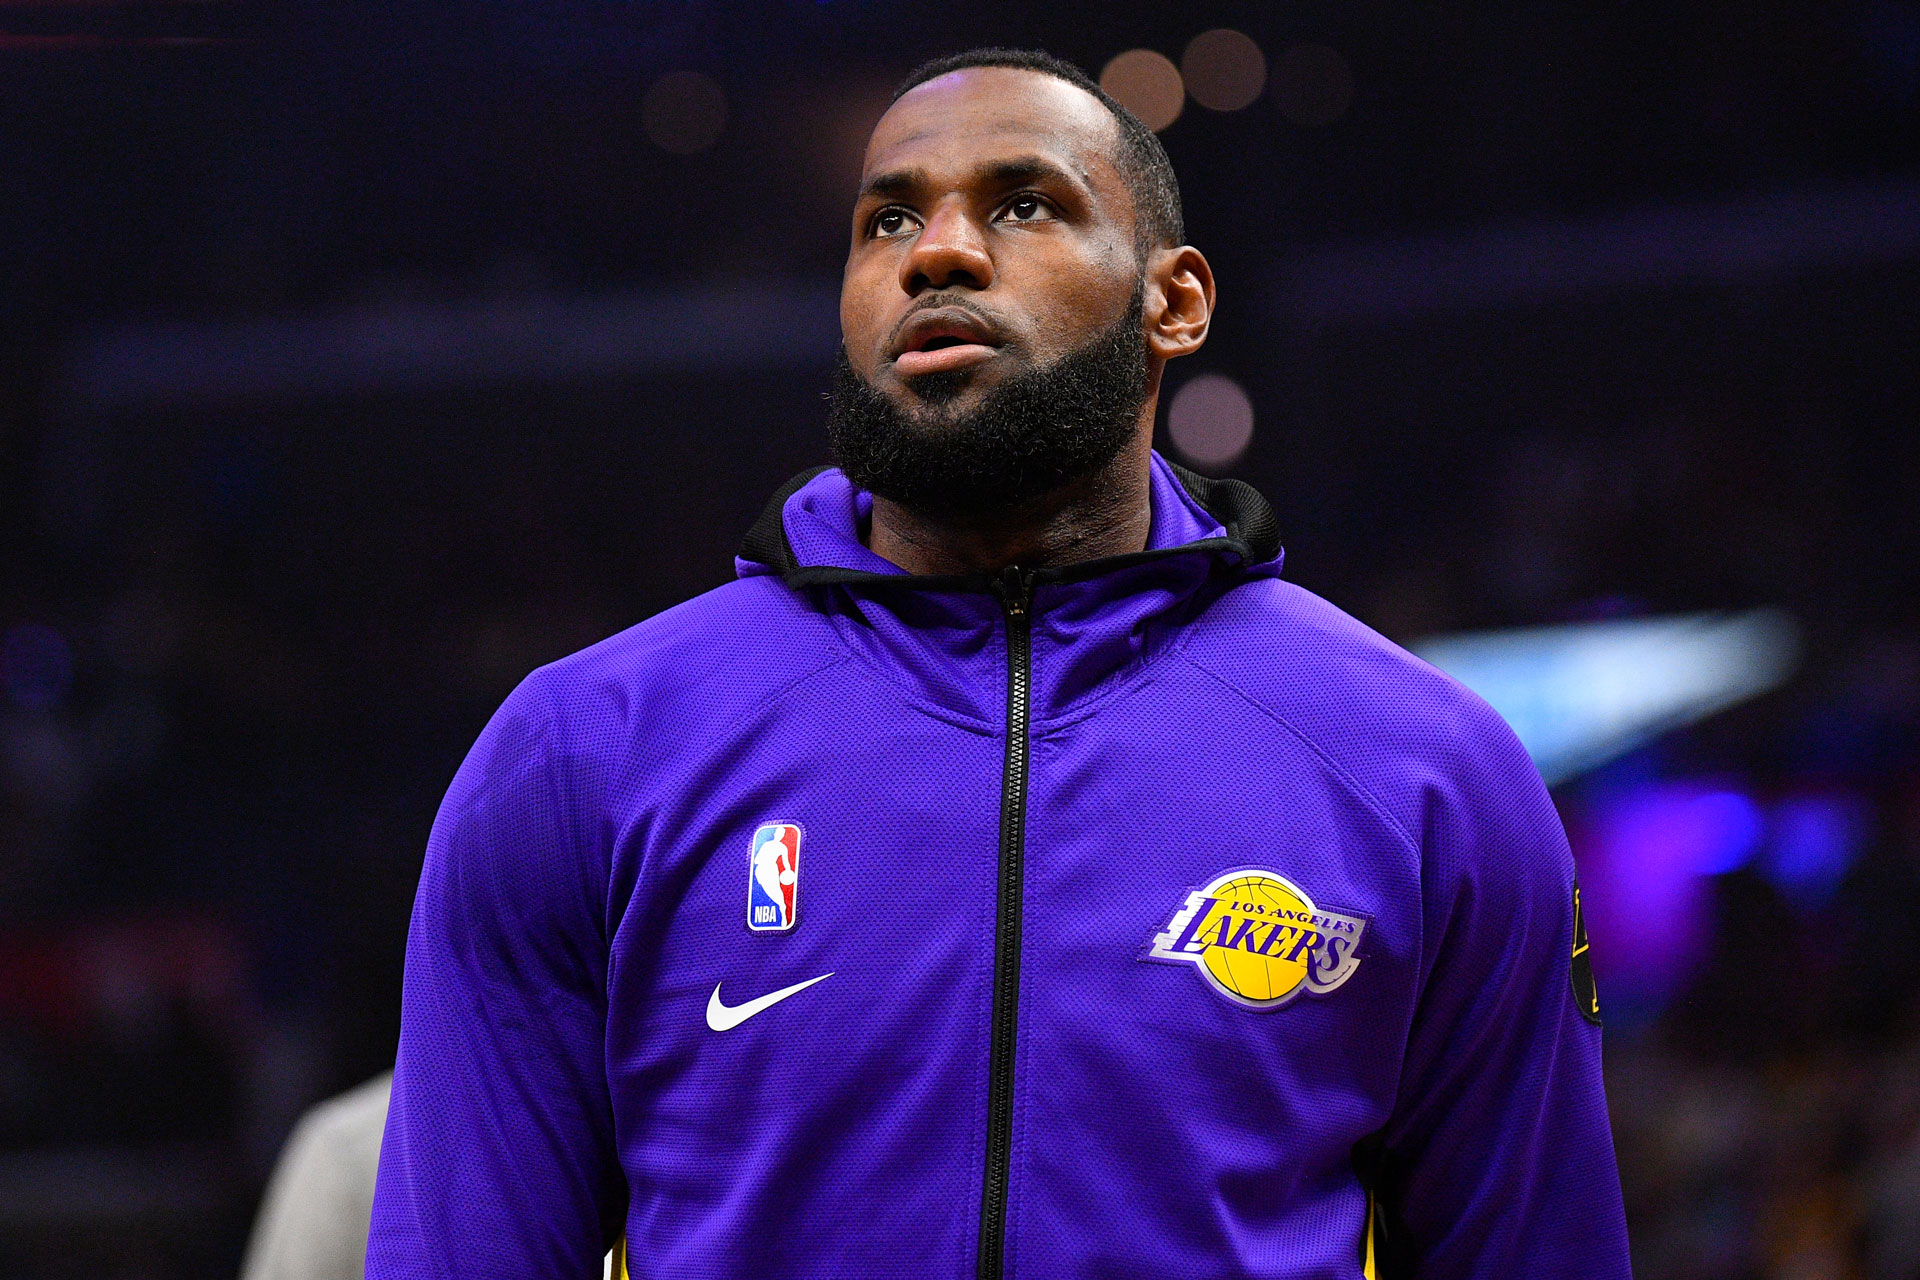 Los Angeles Lakers Forward LeBron James looks on before a NBA game in Los Angeles, California, March 8, 2020.